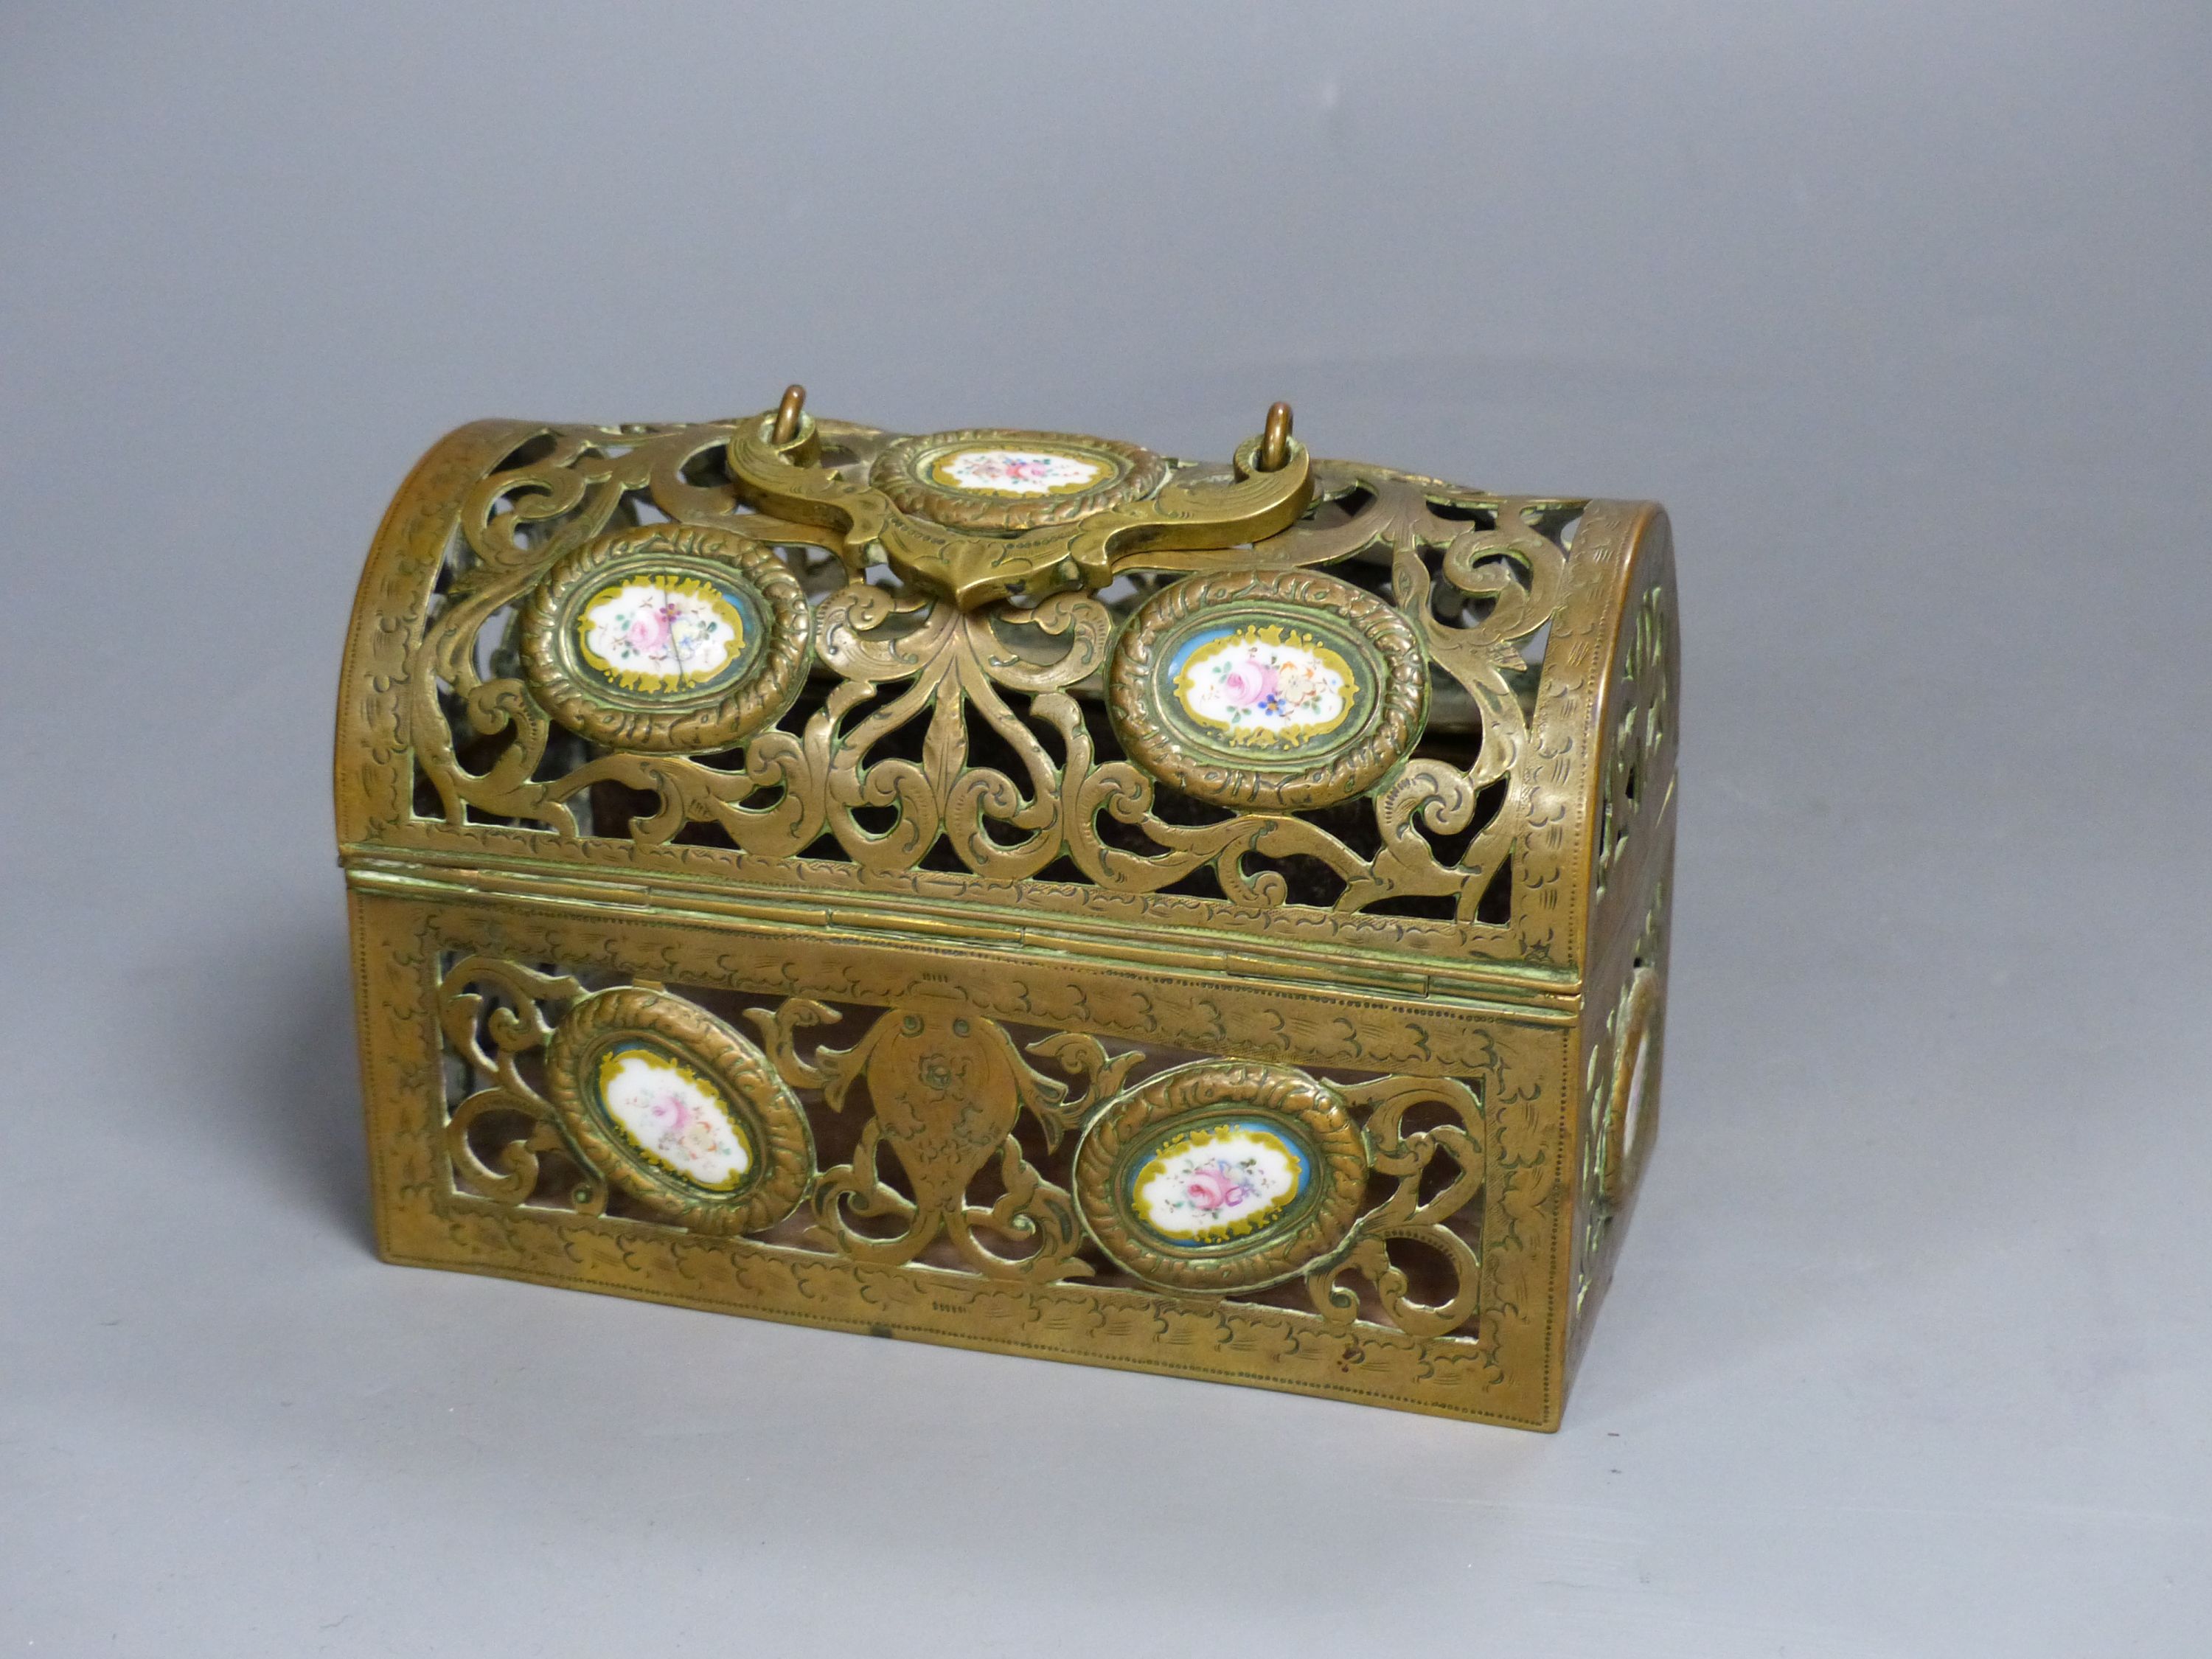 A 19th century French pierced and engraved bronze and enamel casket, 14cm